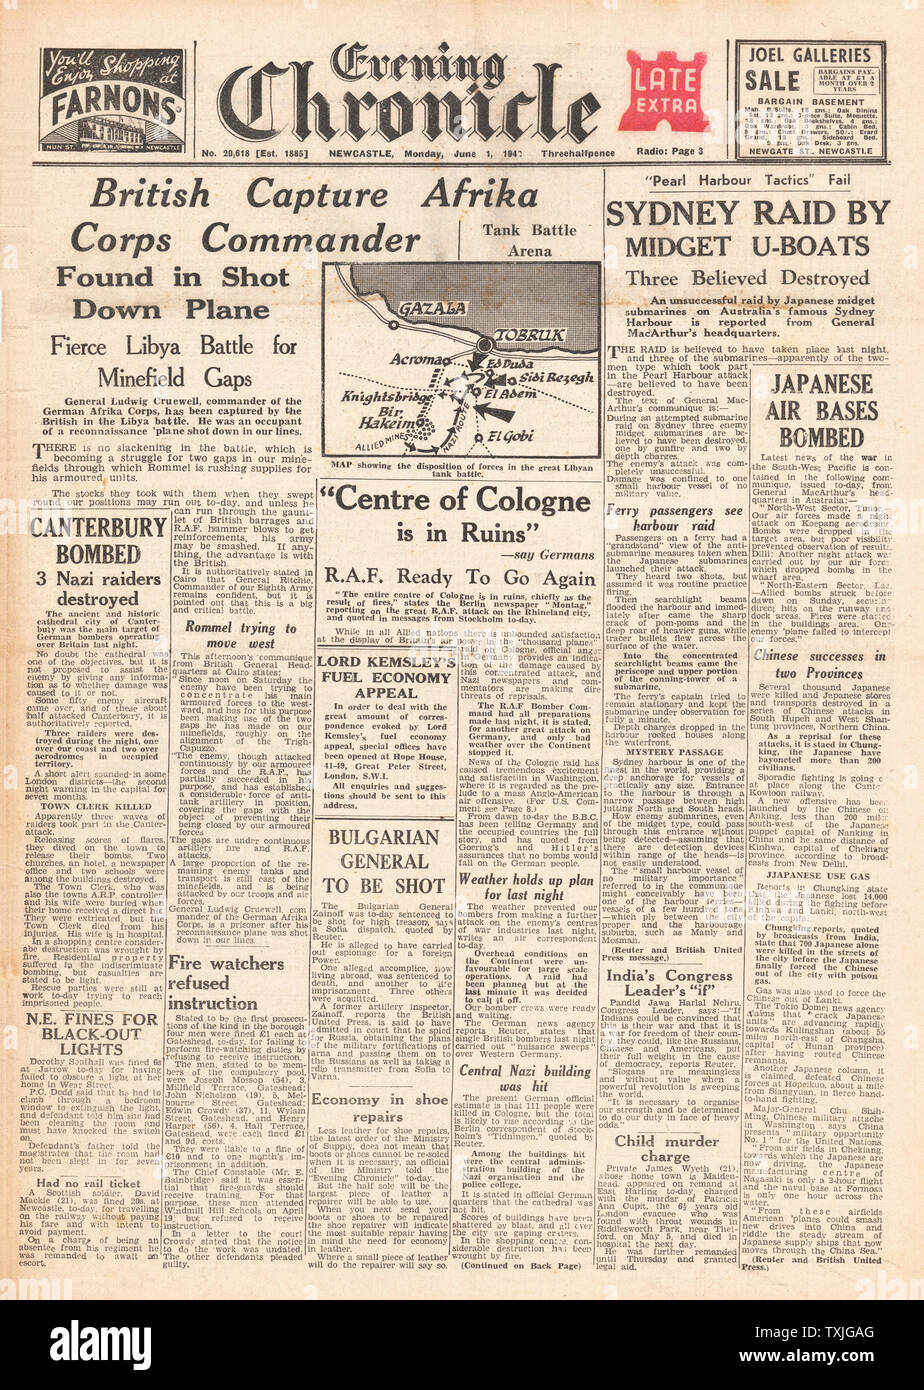 1942 front page Evening Chronicle RAF Carry out first 1,000 Bomber Raid on Cologne, General Ludwig Crüwell captured during Battle for Libya and Japanese Midget Submarines raid Sydney Stock Photo